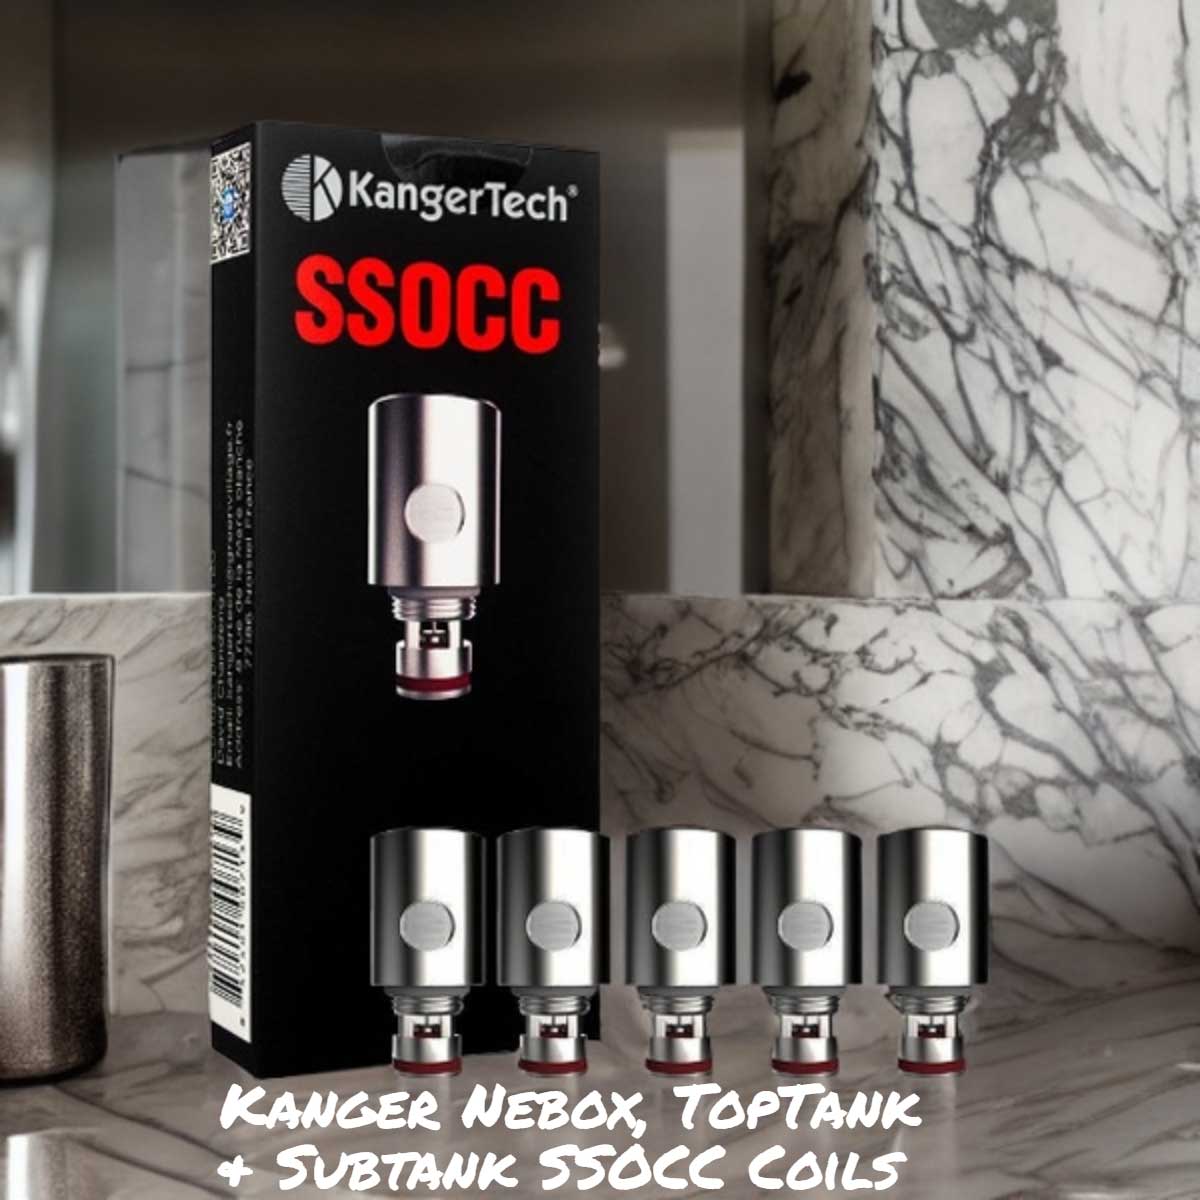 SSOCC Replacement Coils For The Kanger Nebox, TopTank & Subtank